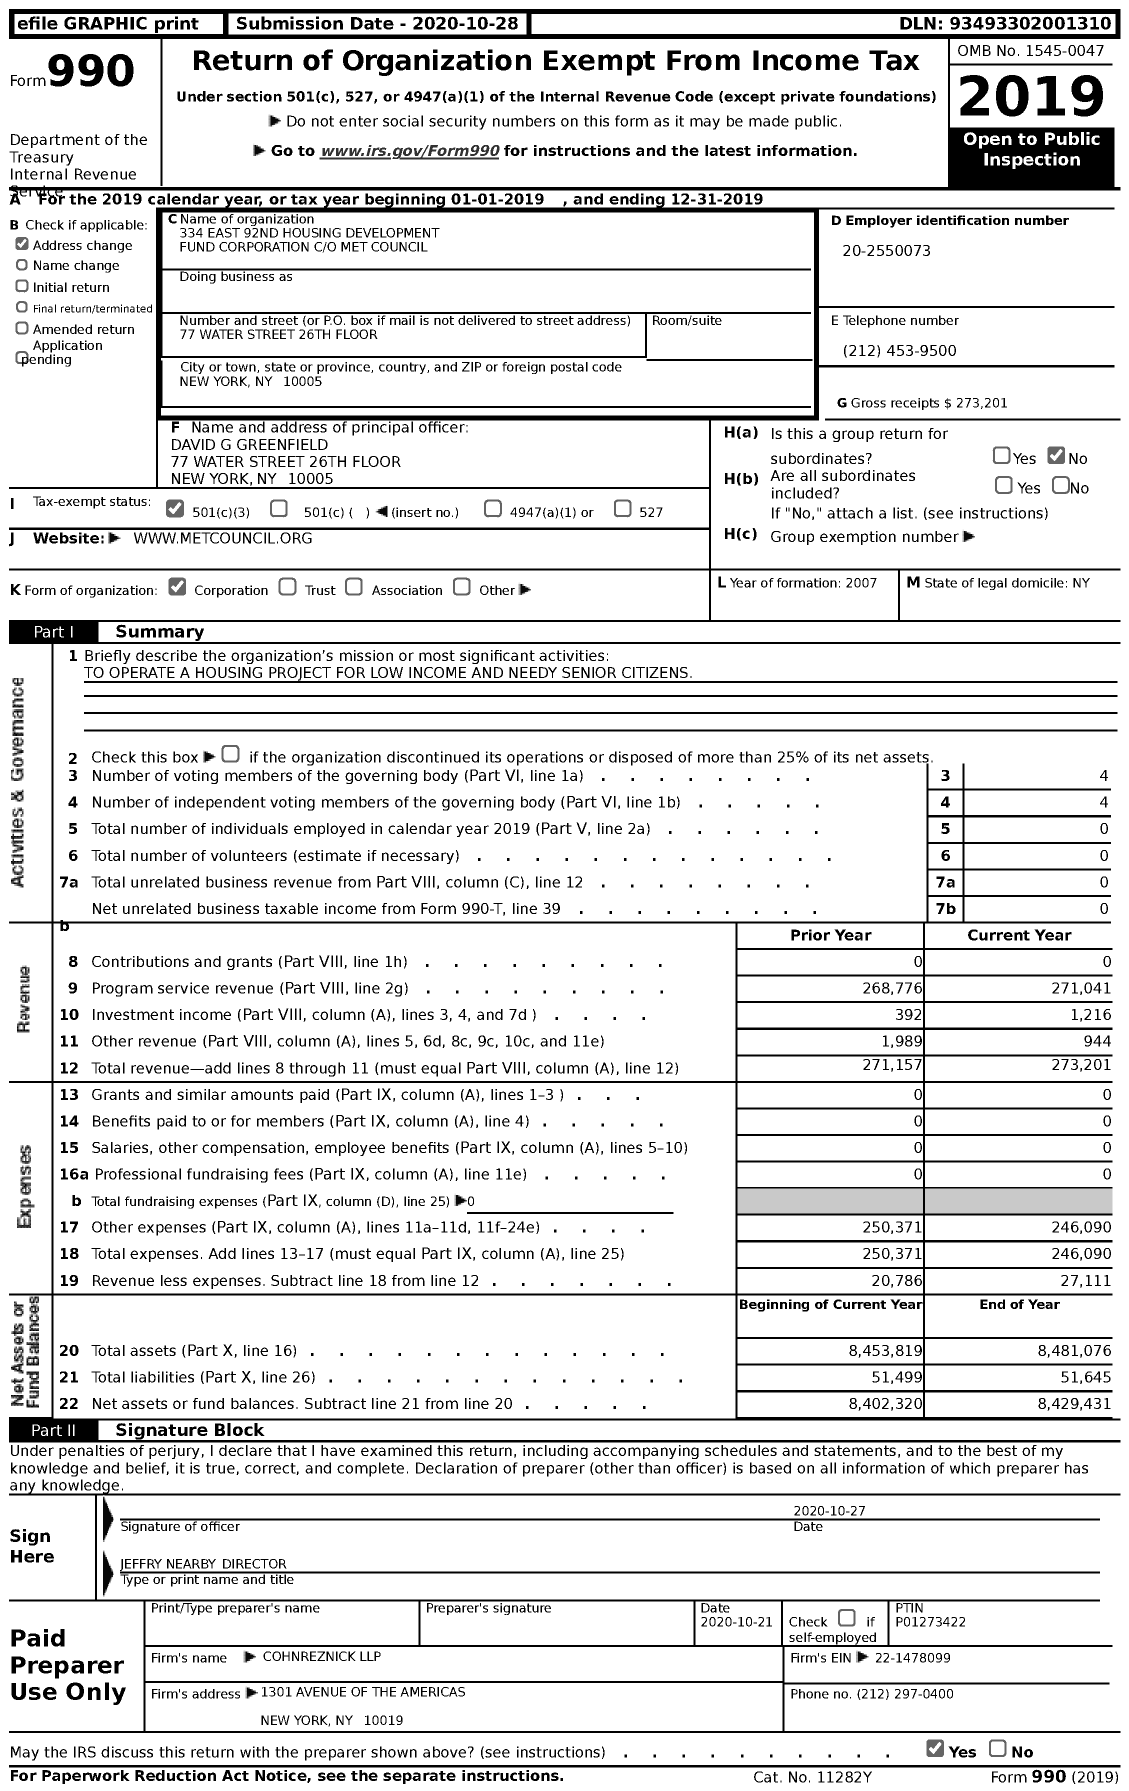 Image of first page of 2019 Form 990 for 334 East 92nd Housing Development FUND CORPORATION